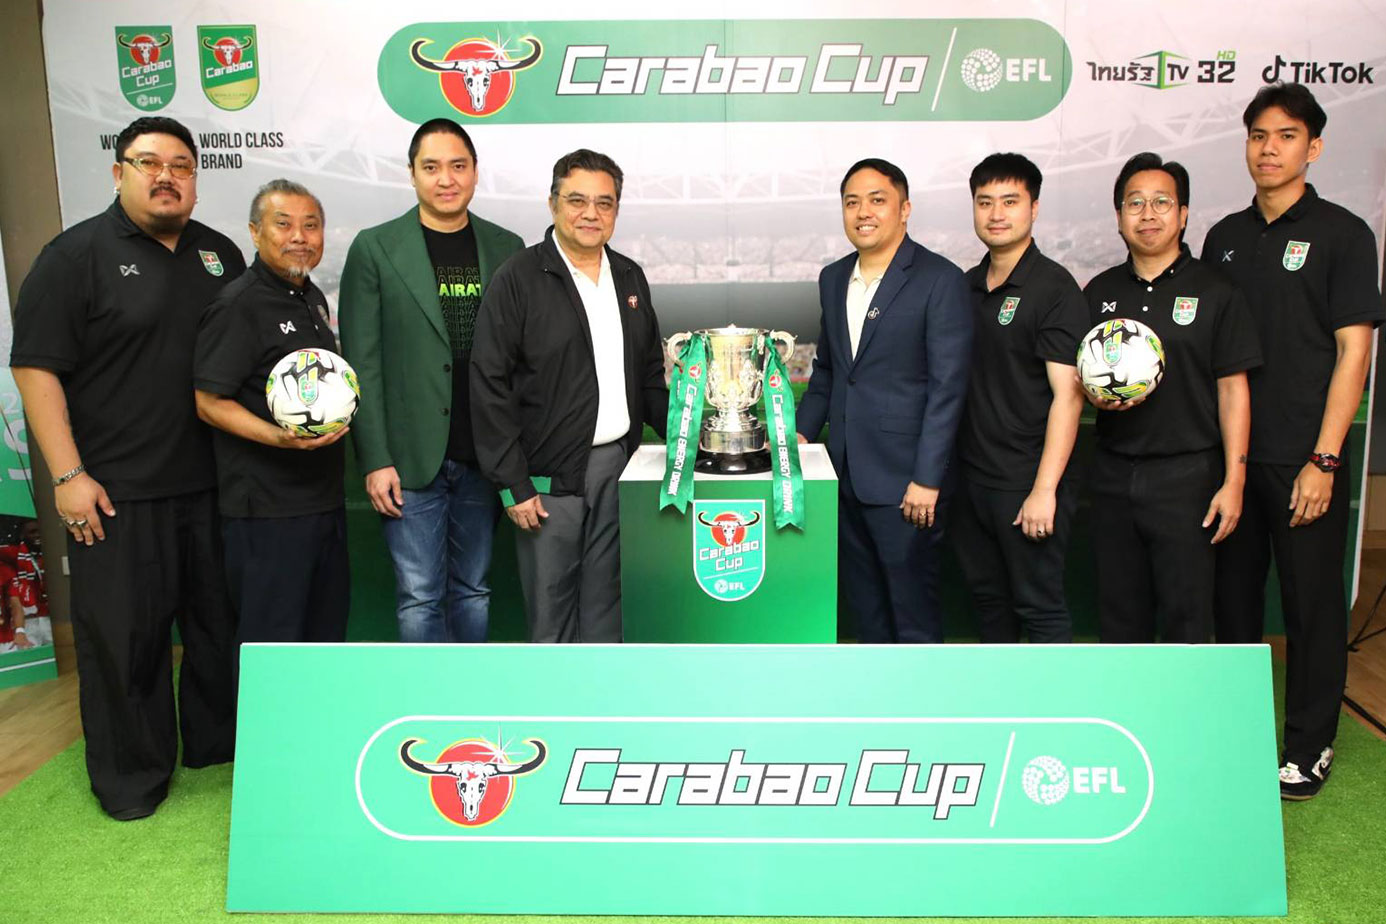 Carabao Extends Carabao Cup Contract for Three More Years, Expanding Global Reach of Its Beverage Brand